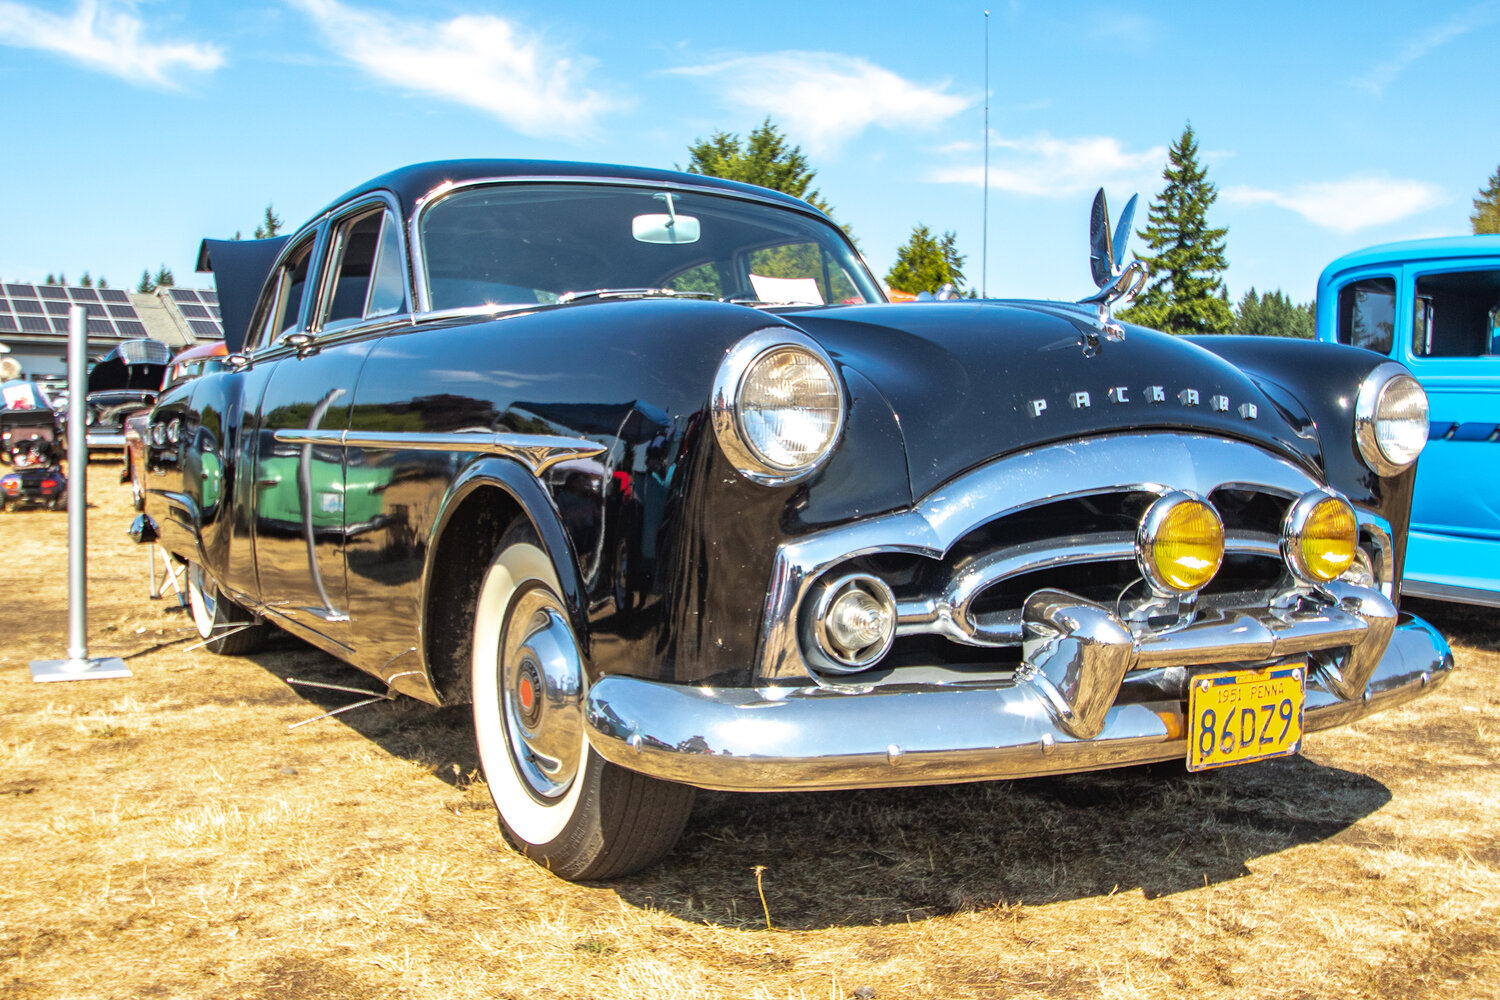 A 1951 Packard 200 Deluxe, owned by Steve of Rochester, is displayed at the 16th annual Military Heroes Car Show on Saturday, Sept. 2, at Wilkowski Park in Rainier. The iconic swan hood ornament would soon leave in 1953, as auto manufacturers had to make emblems that weren’t an impalement hazard to pedestrians.